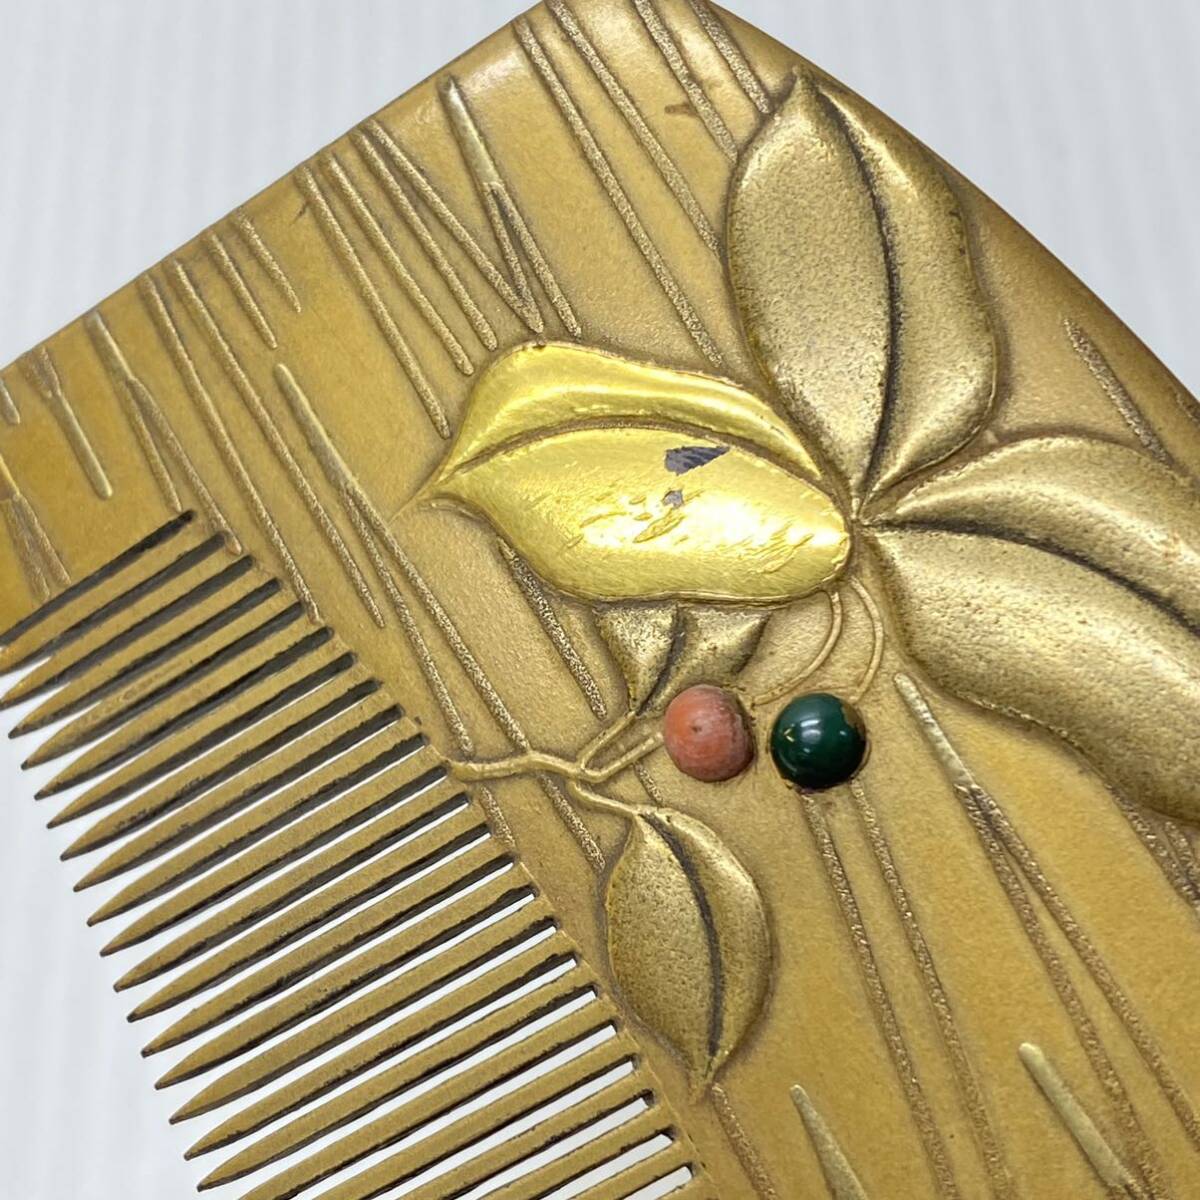  era thing wooden gold lacqering gold ... antique hair ornament comb kimono small articles antique collection old house warehouse .